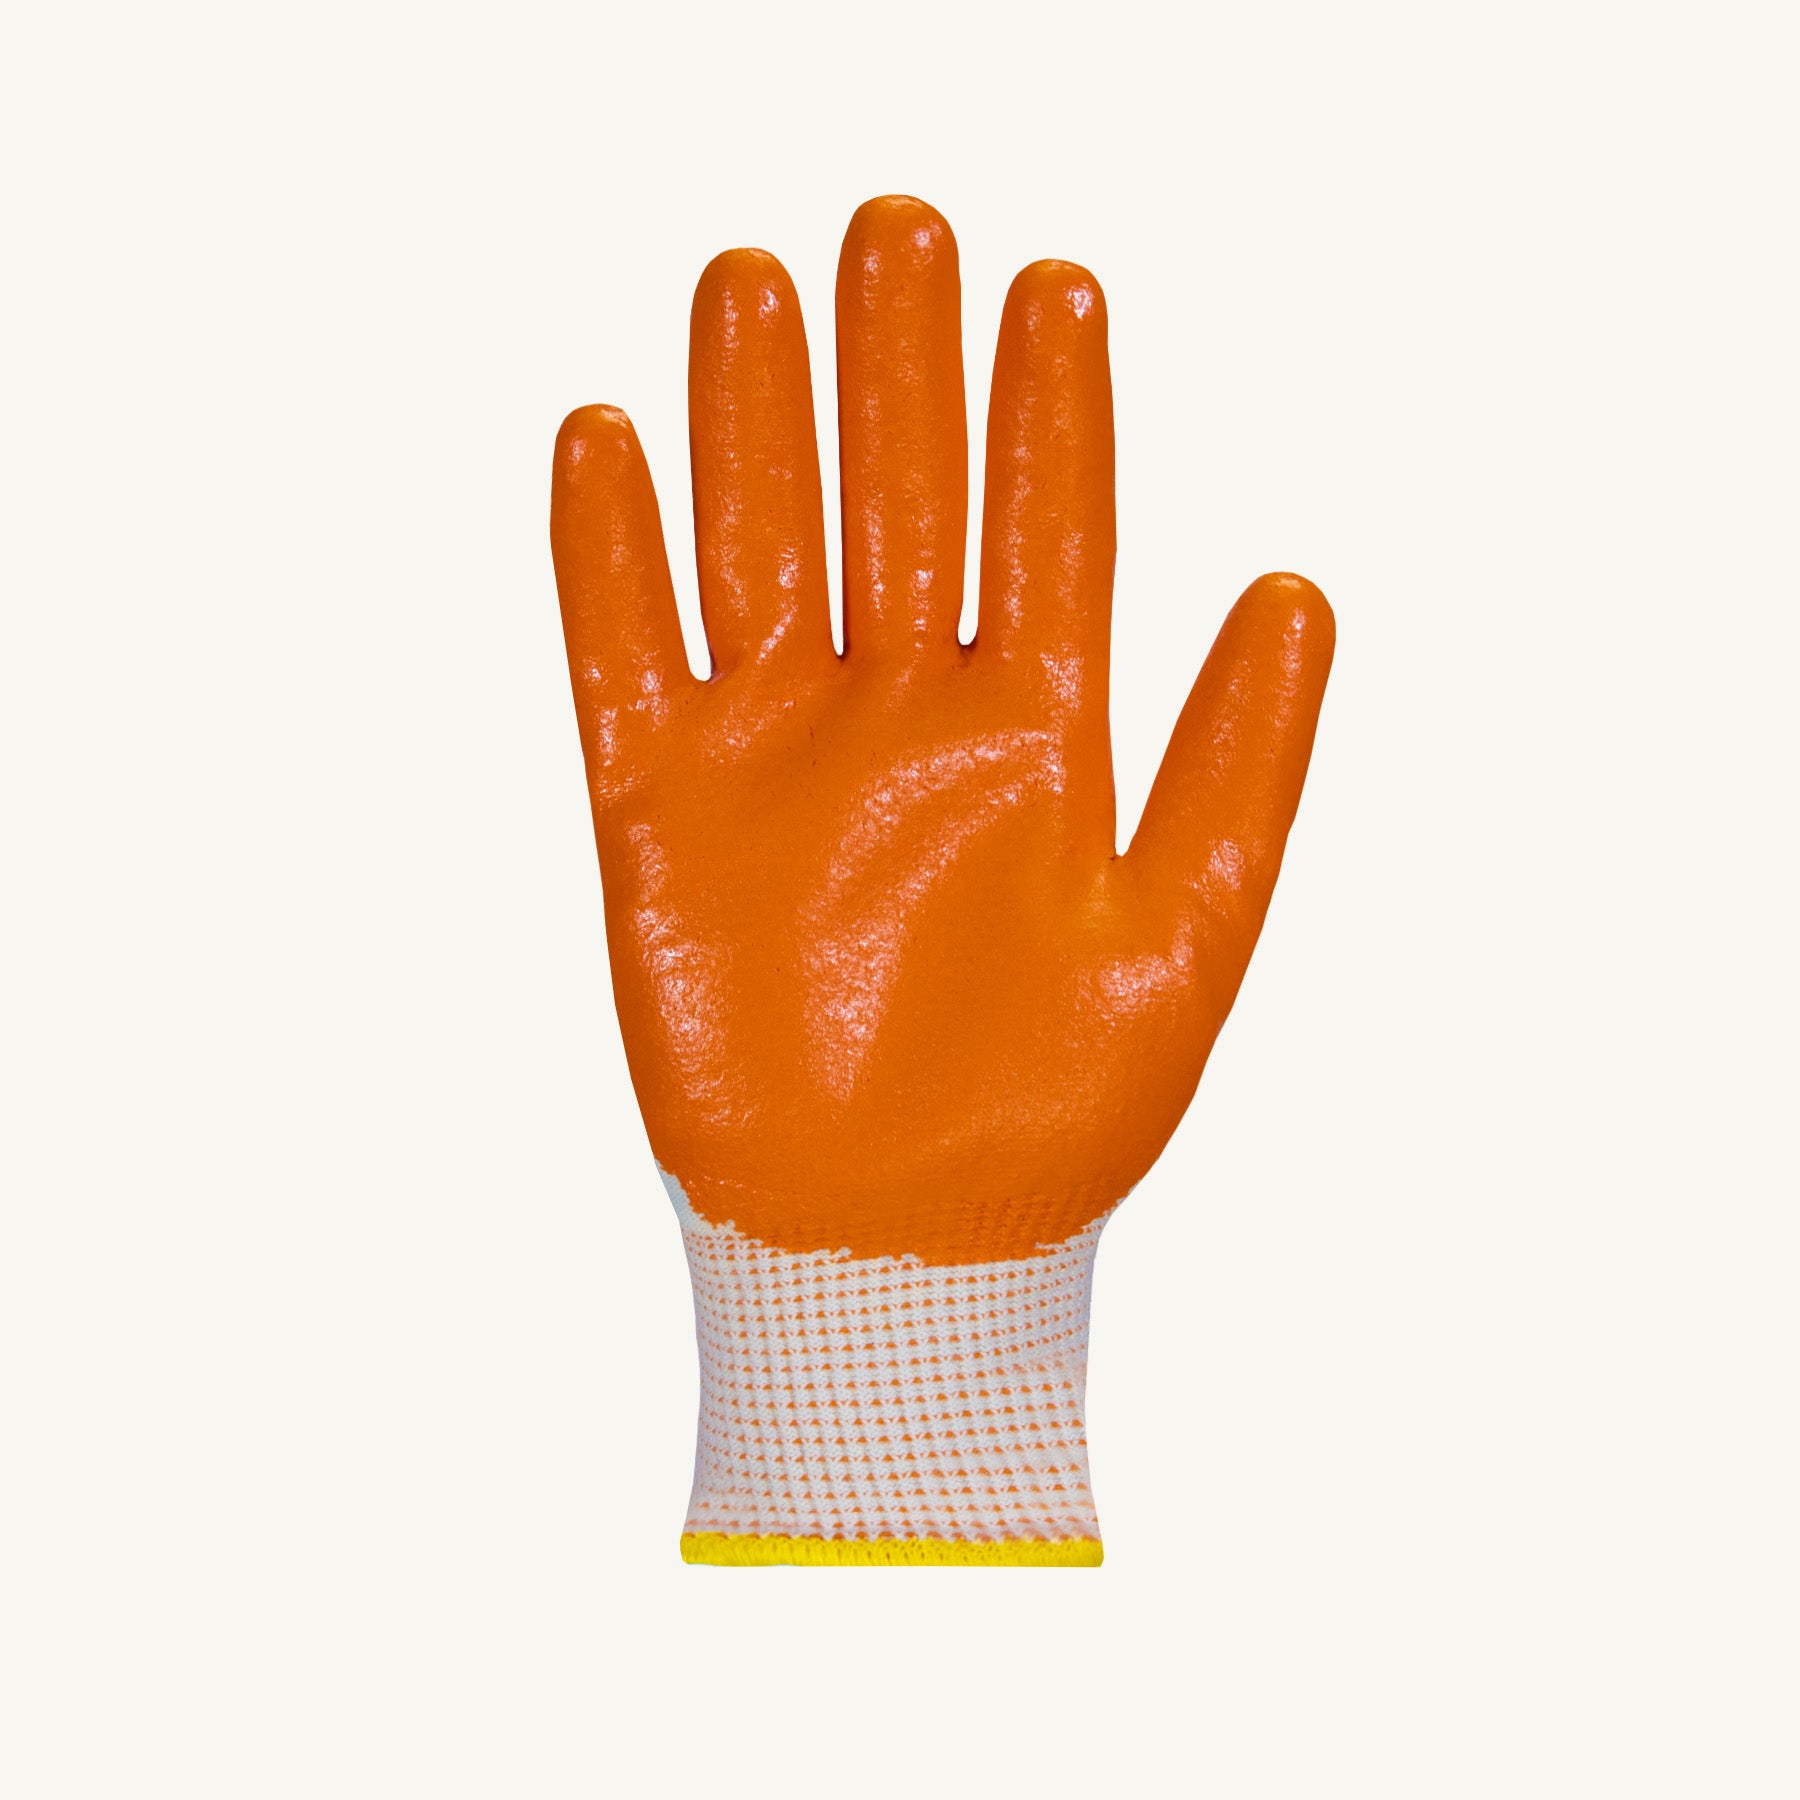 COOLJOB Work Gloves 15 Gauge Coated - Superior Protection and Comfort